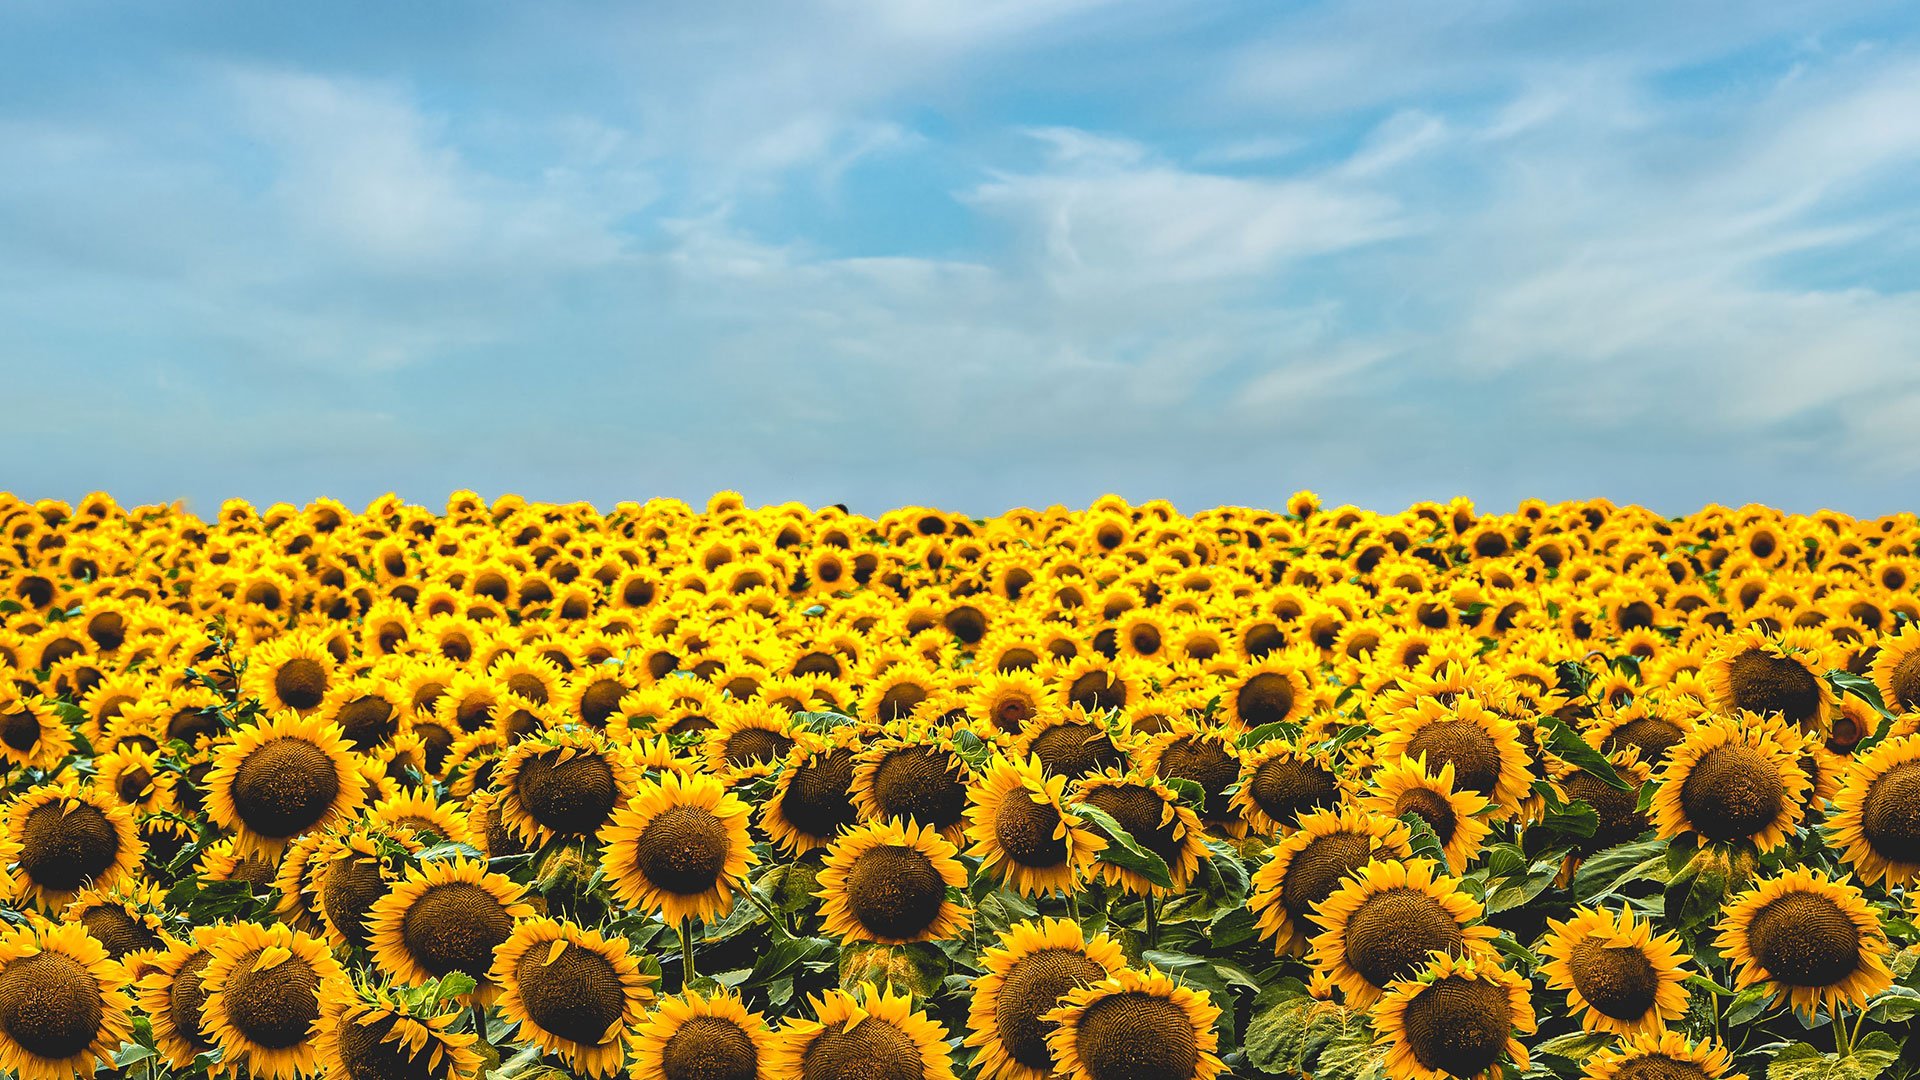 A field of yellow sunflowers against a blue sky